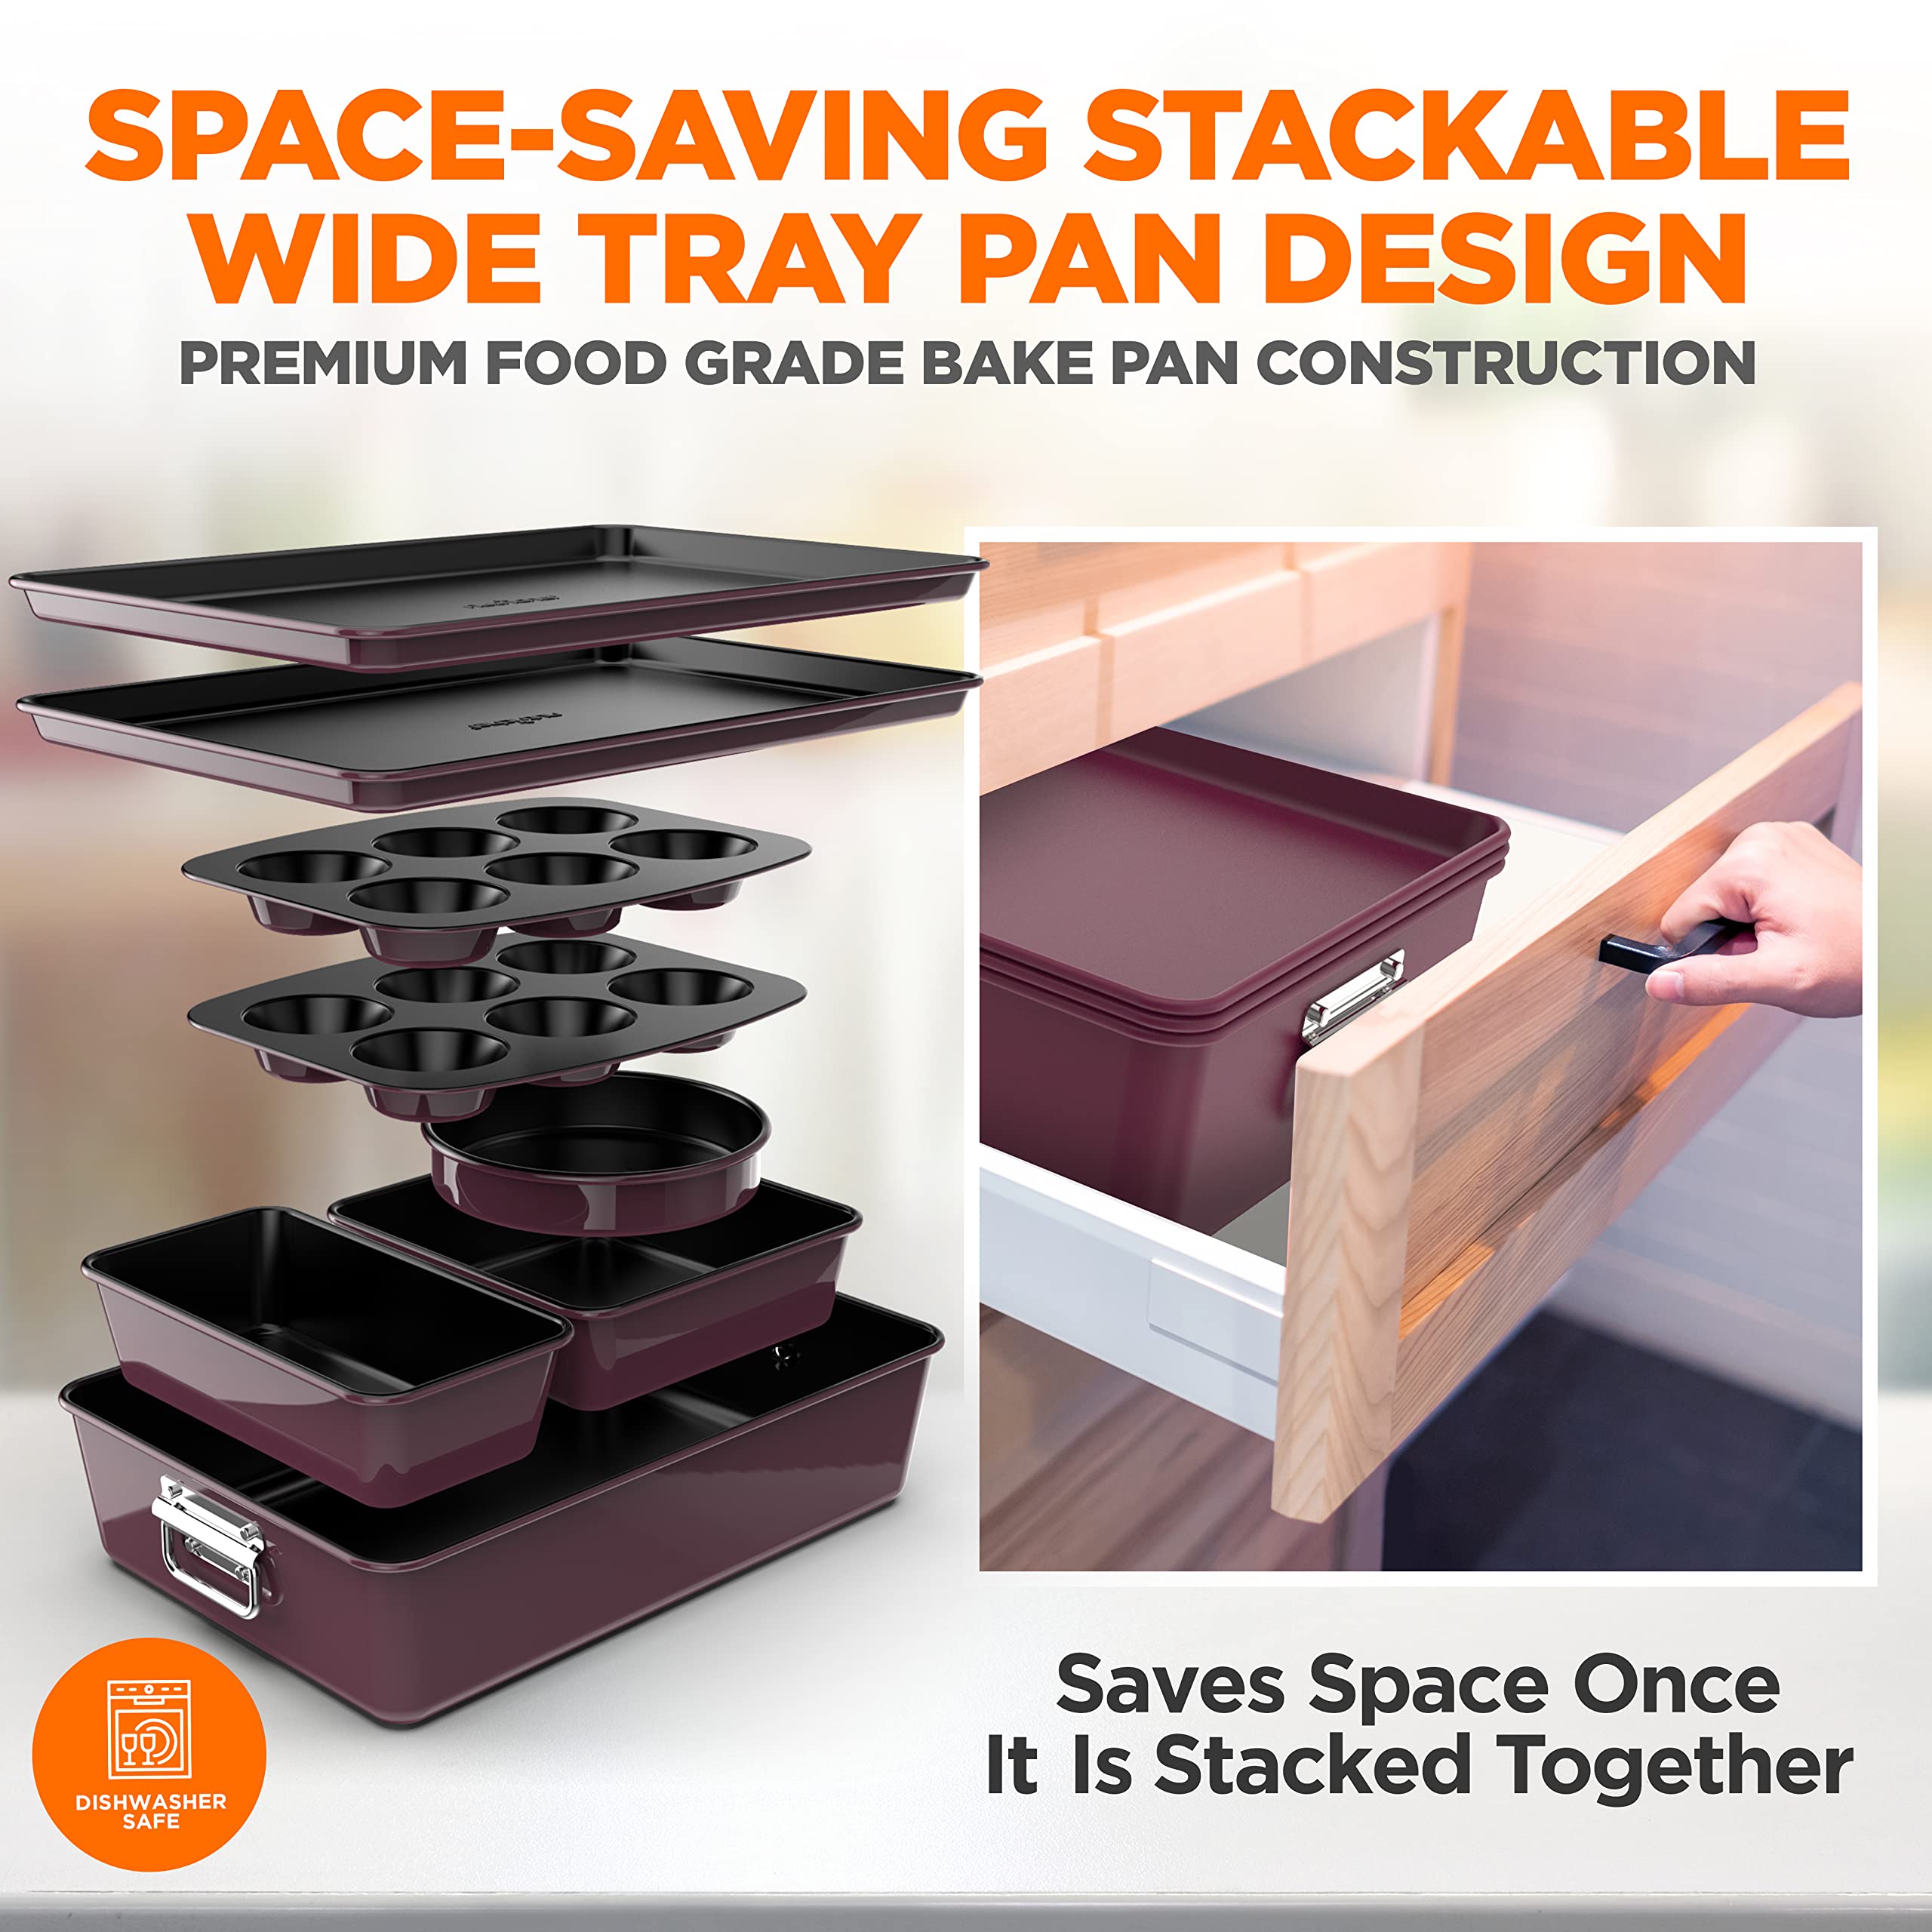 NutriChef 8-Piece Nonstick Stackable Bakeware Set - PFOA, PFOS, PTFE Free Baking Tray Set w/Non-Stick Coating, 450°F Oven Safe, Round Cake, Loaf, Muffin, Wide/Square Pans, Cookie Sheet (Plum)